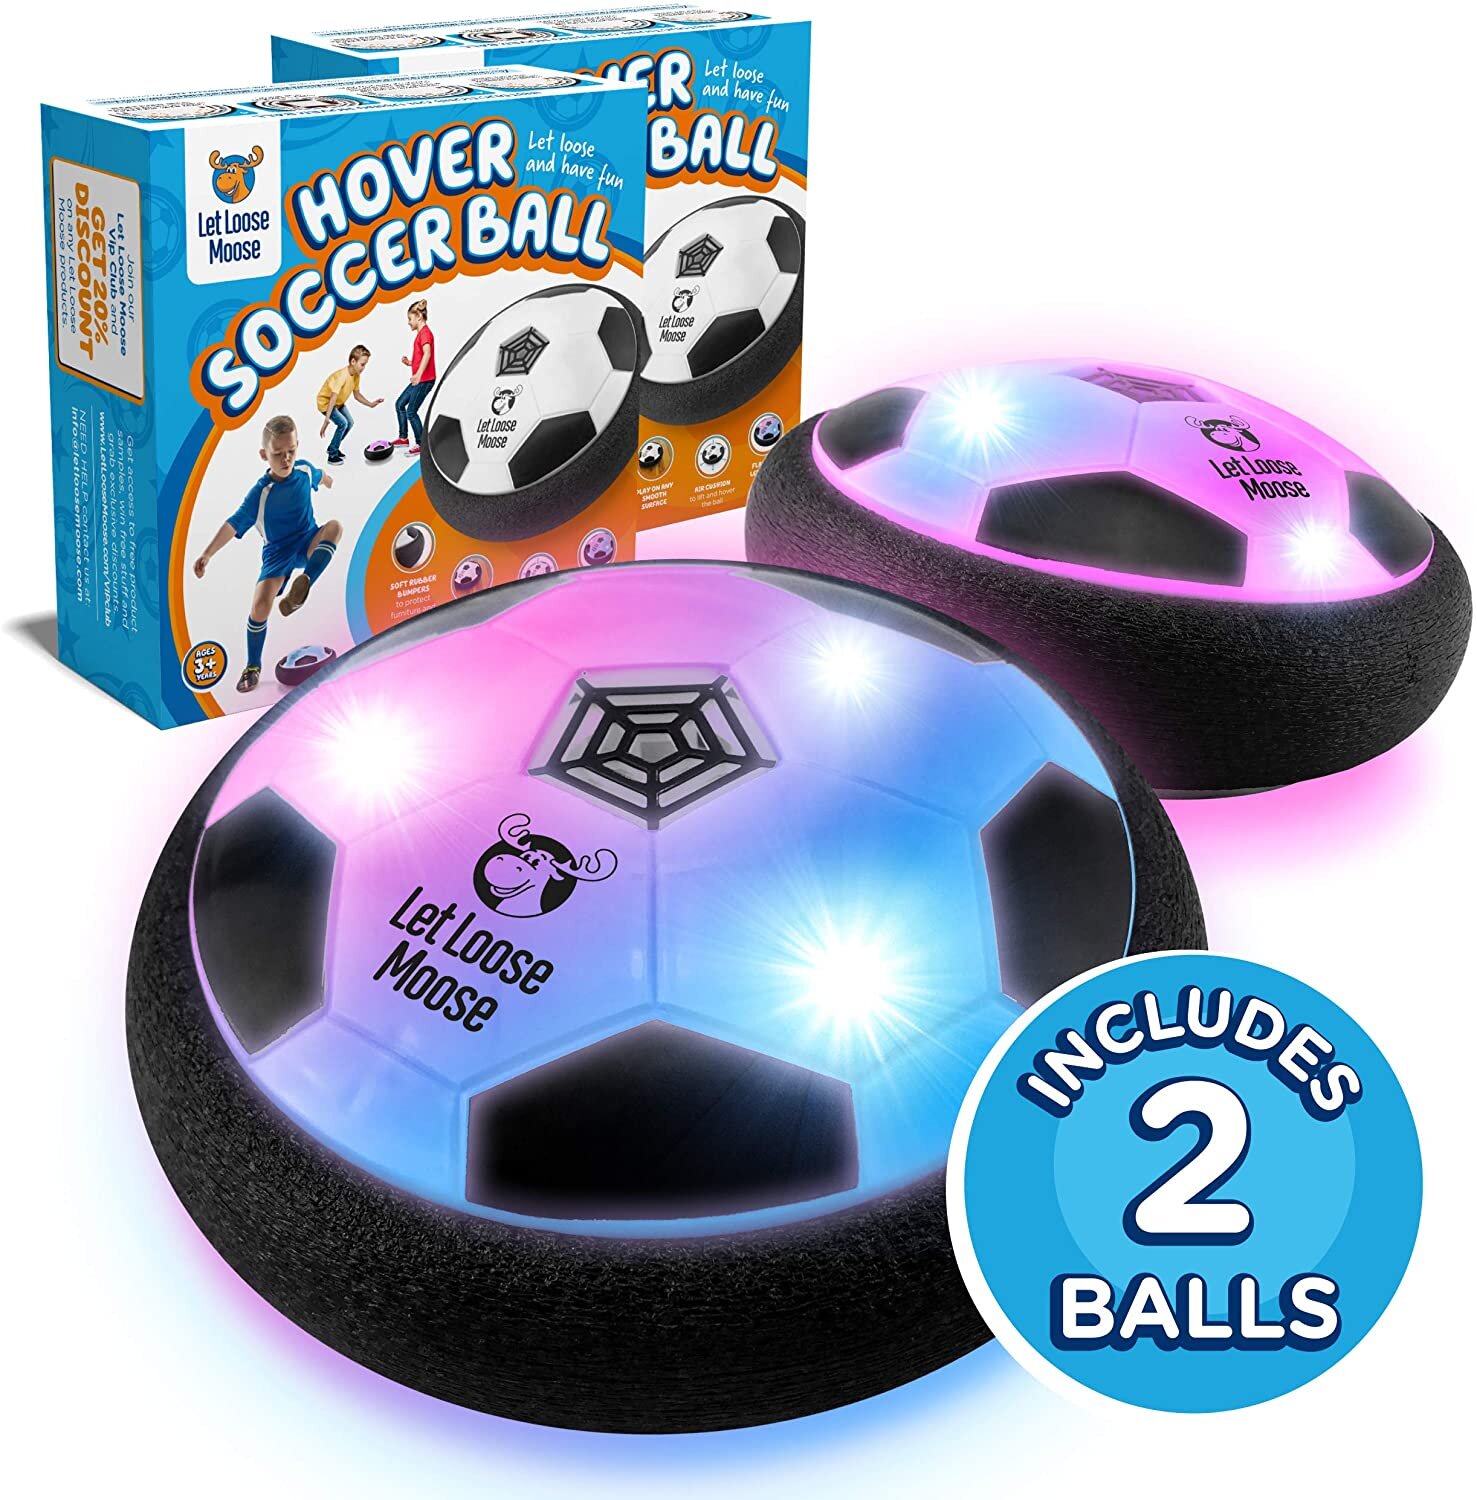 2 Pack Glow in The Dark Soccer Ball Light up LED Soccer Ball Official Size 5 Glow Ball with 2 Pump and 10 Spare Batteries Balls Gift for Teens Kids Adults Match Training Game Outdoor or Indoor 